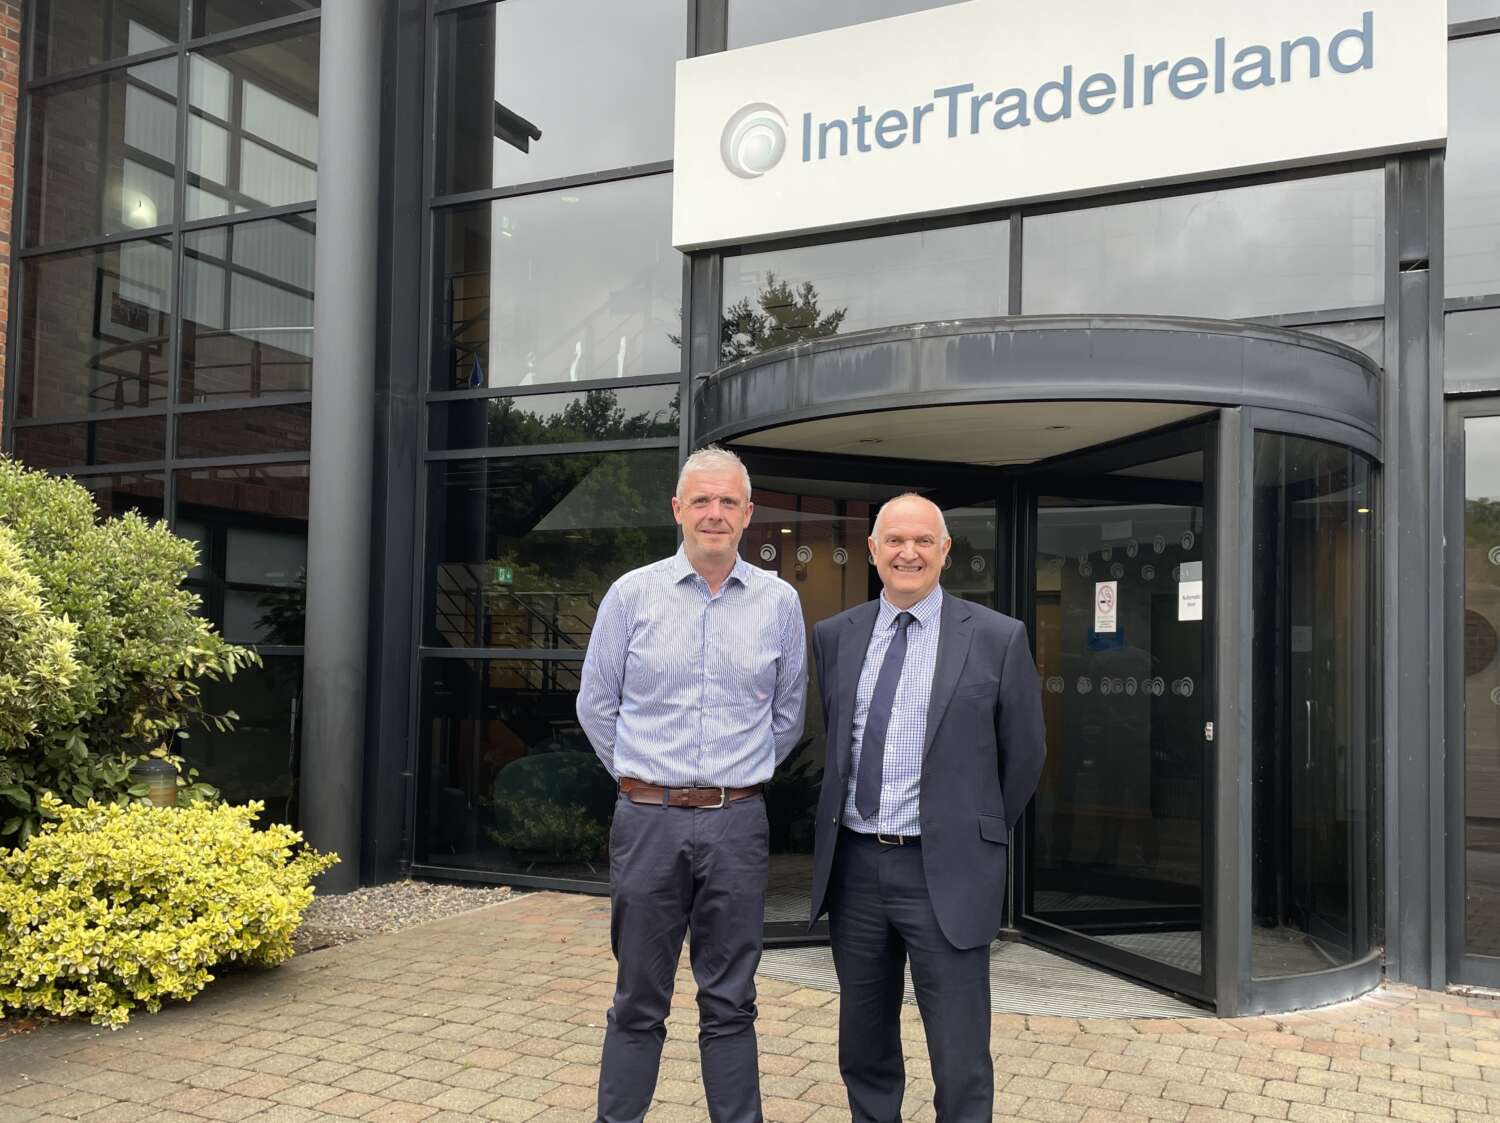 Colm Mc Gribben owner of Viltra and Martin Robinson are pictured outside Inter Trade Irelands Offices